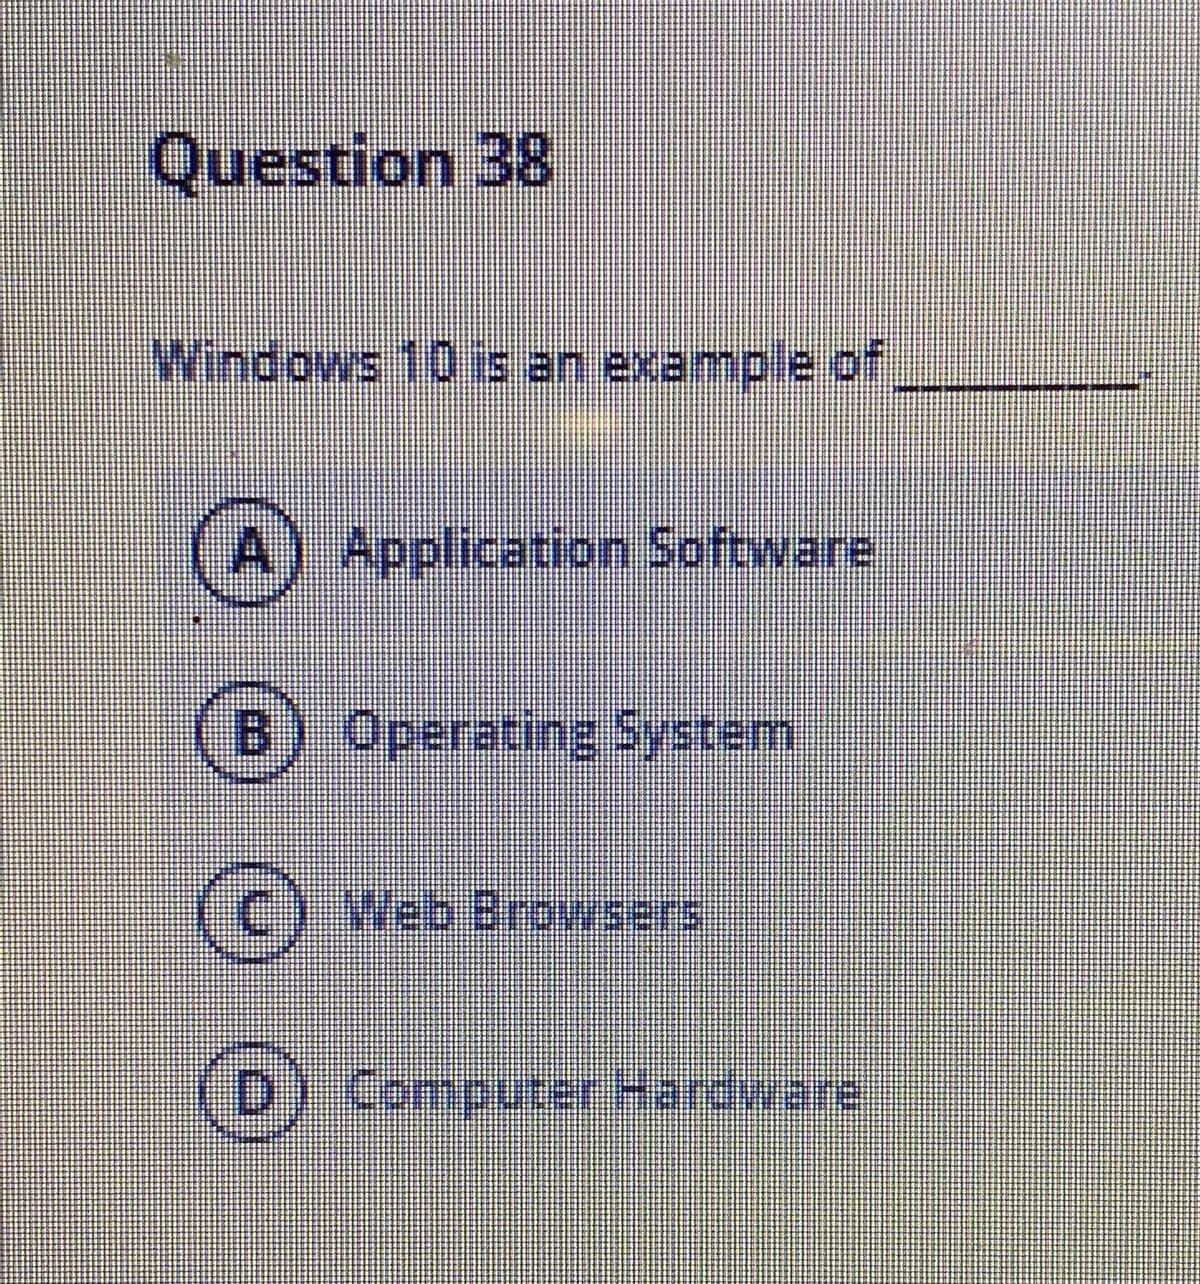 Question 38
Windows 10 is an example of
Application Software
B) Operating System
Web Browsers
Computer Hardware
